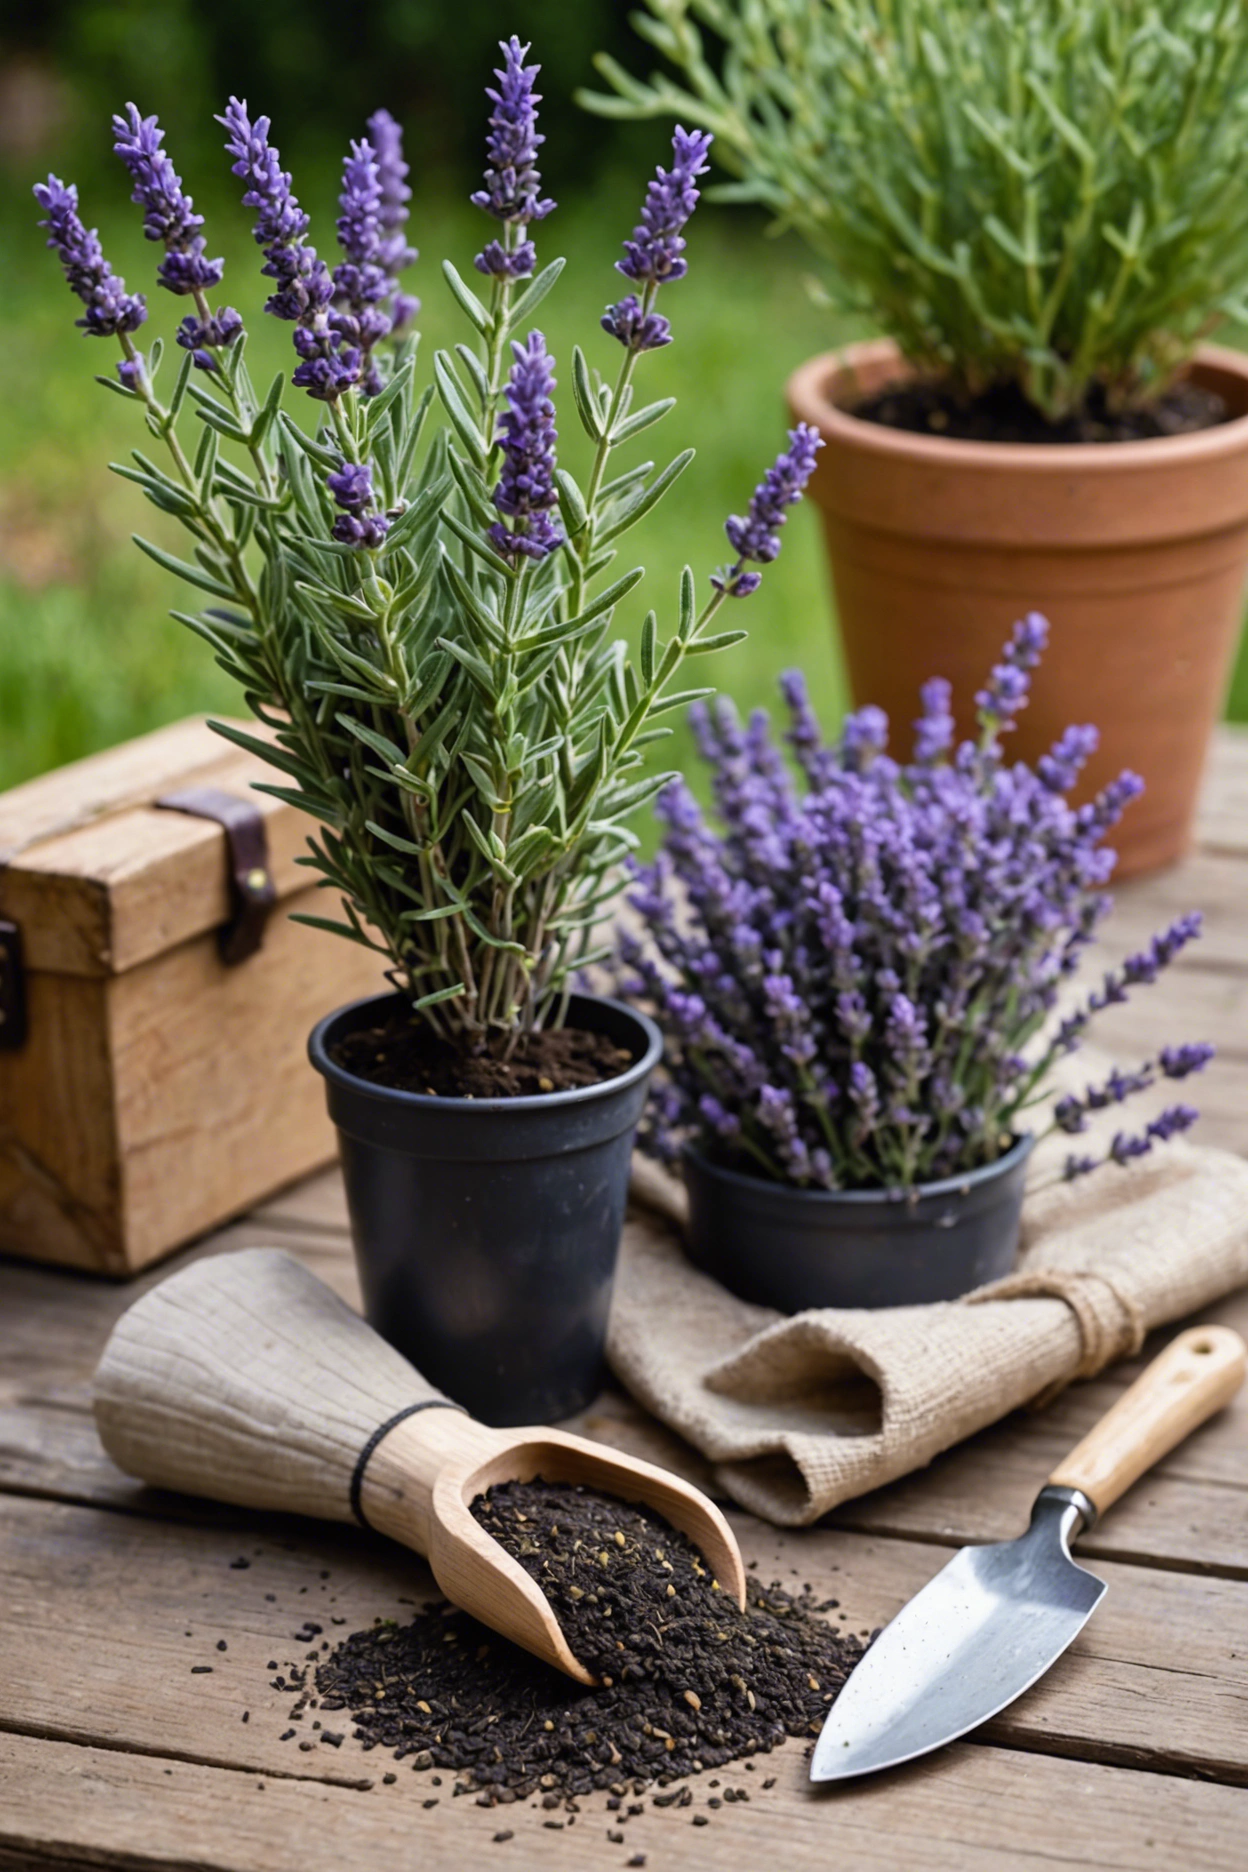 "Lavender 'Provence' plant with unopened buds on a table with gardening tools, soil mix, and an empty pot in the background."